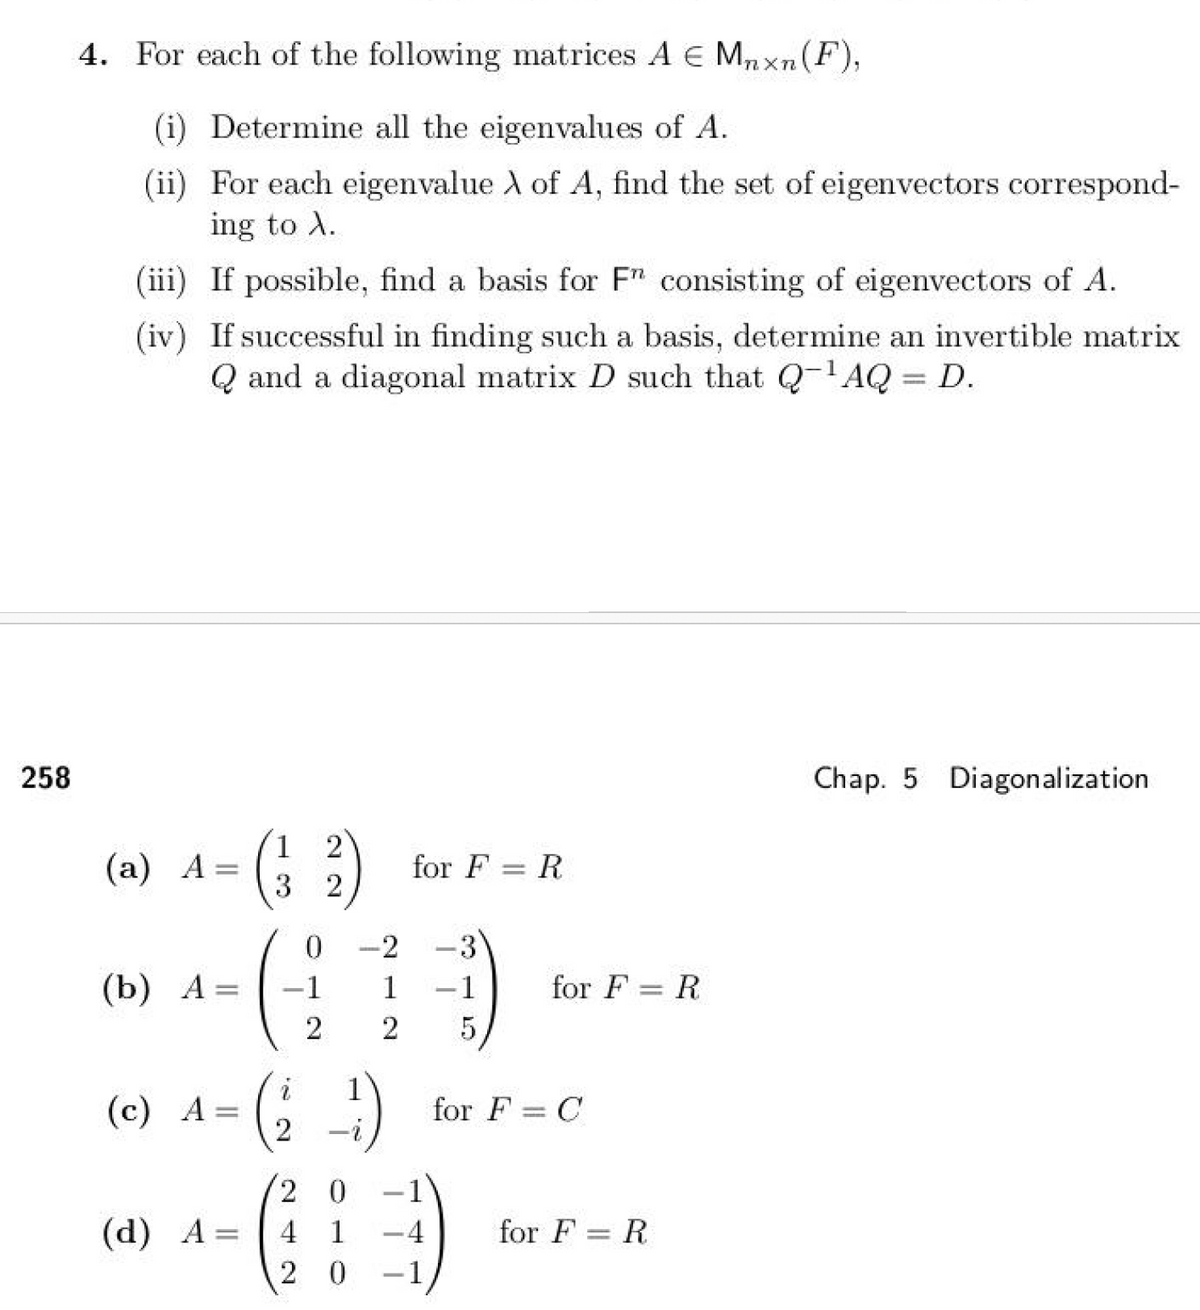 4. For each of the following matrices A Є Mnxn (F),
(i) Determine all the eigenvalues of A.
(ii) For each eigenvalue A of A, find the set of eigenvectors correspond-
ing to A.
(iii) If possible, find a basis for F" consisting of eigenvectors of A.
(iv) If successful in finding such a basis, determine an invertible matrix
Qand a diagonal matrix D such that Q¹AQ = D.
258
1
(a) A = ( 3 )
for FR
0 -2
3
(b) A =
-1
1
-1
for FR
2
2
5
i
1
(c) A=
=
for F = C
=
2
0
-
(d) A=
4
1
-4
for F = R
2
0
-1
Chap. 5 Diagonalization